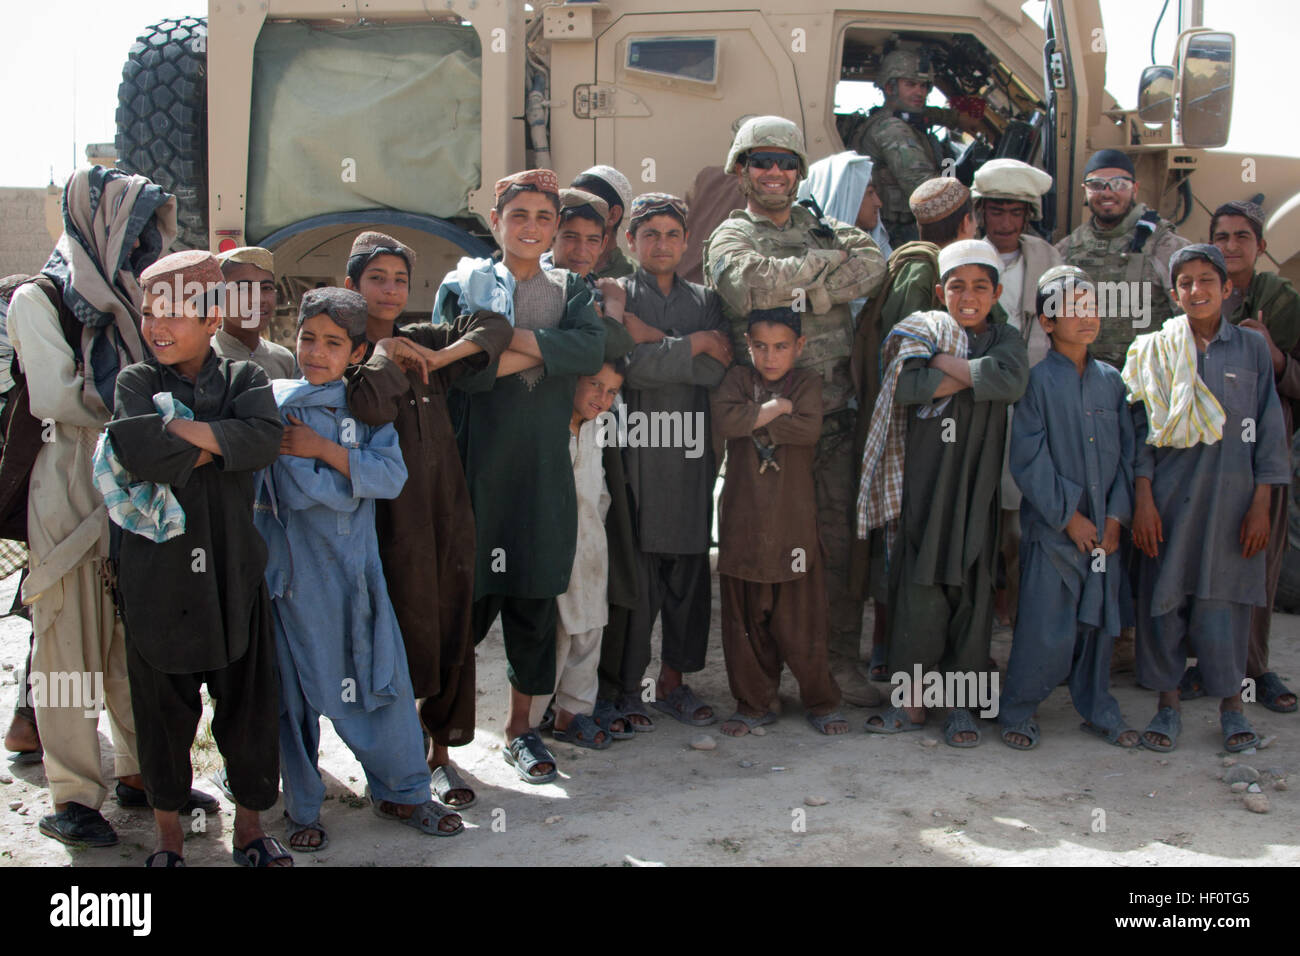 Ed, a linguist with Tactical Psychological Operations Team (TPT) 1377, supporting 1st Battalion, 7th Marine Regiment, Regimental Combat Team 6, poses with a group of local Afghan children during Operation Sangin Moshtarak Naweed in Sangin, Helmand province, Afghanistan May 18, 2012. Ed and Soldiers with TPT 1377 interacted with the local nationals to help build rapport. (U.S. Marine Corps photo by Sgt. Logan W. Pierce/Released) Operation Sangin Moshtarak Naweed 120518-M-EU691-037 Stock Photo